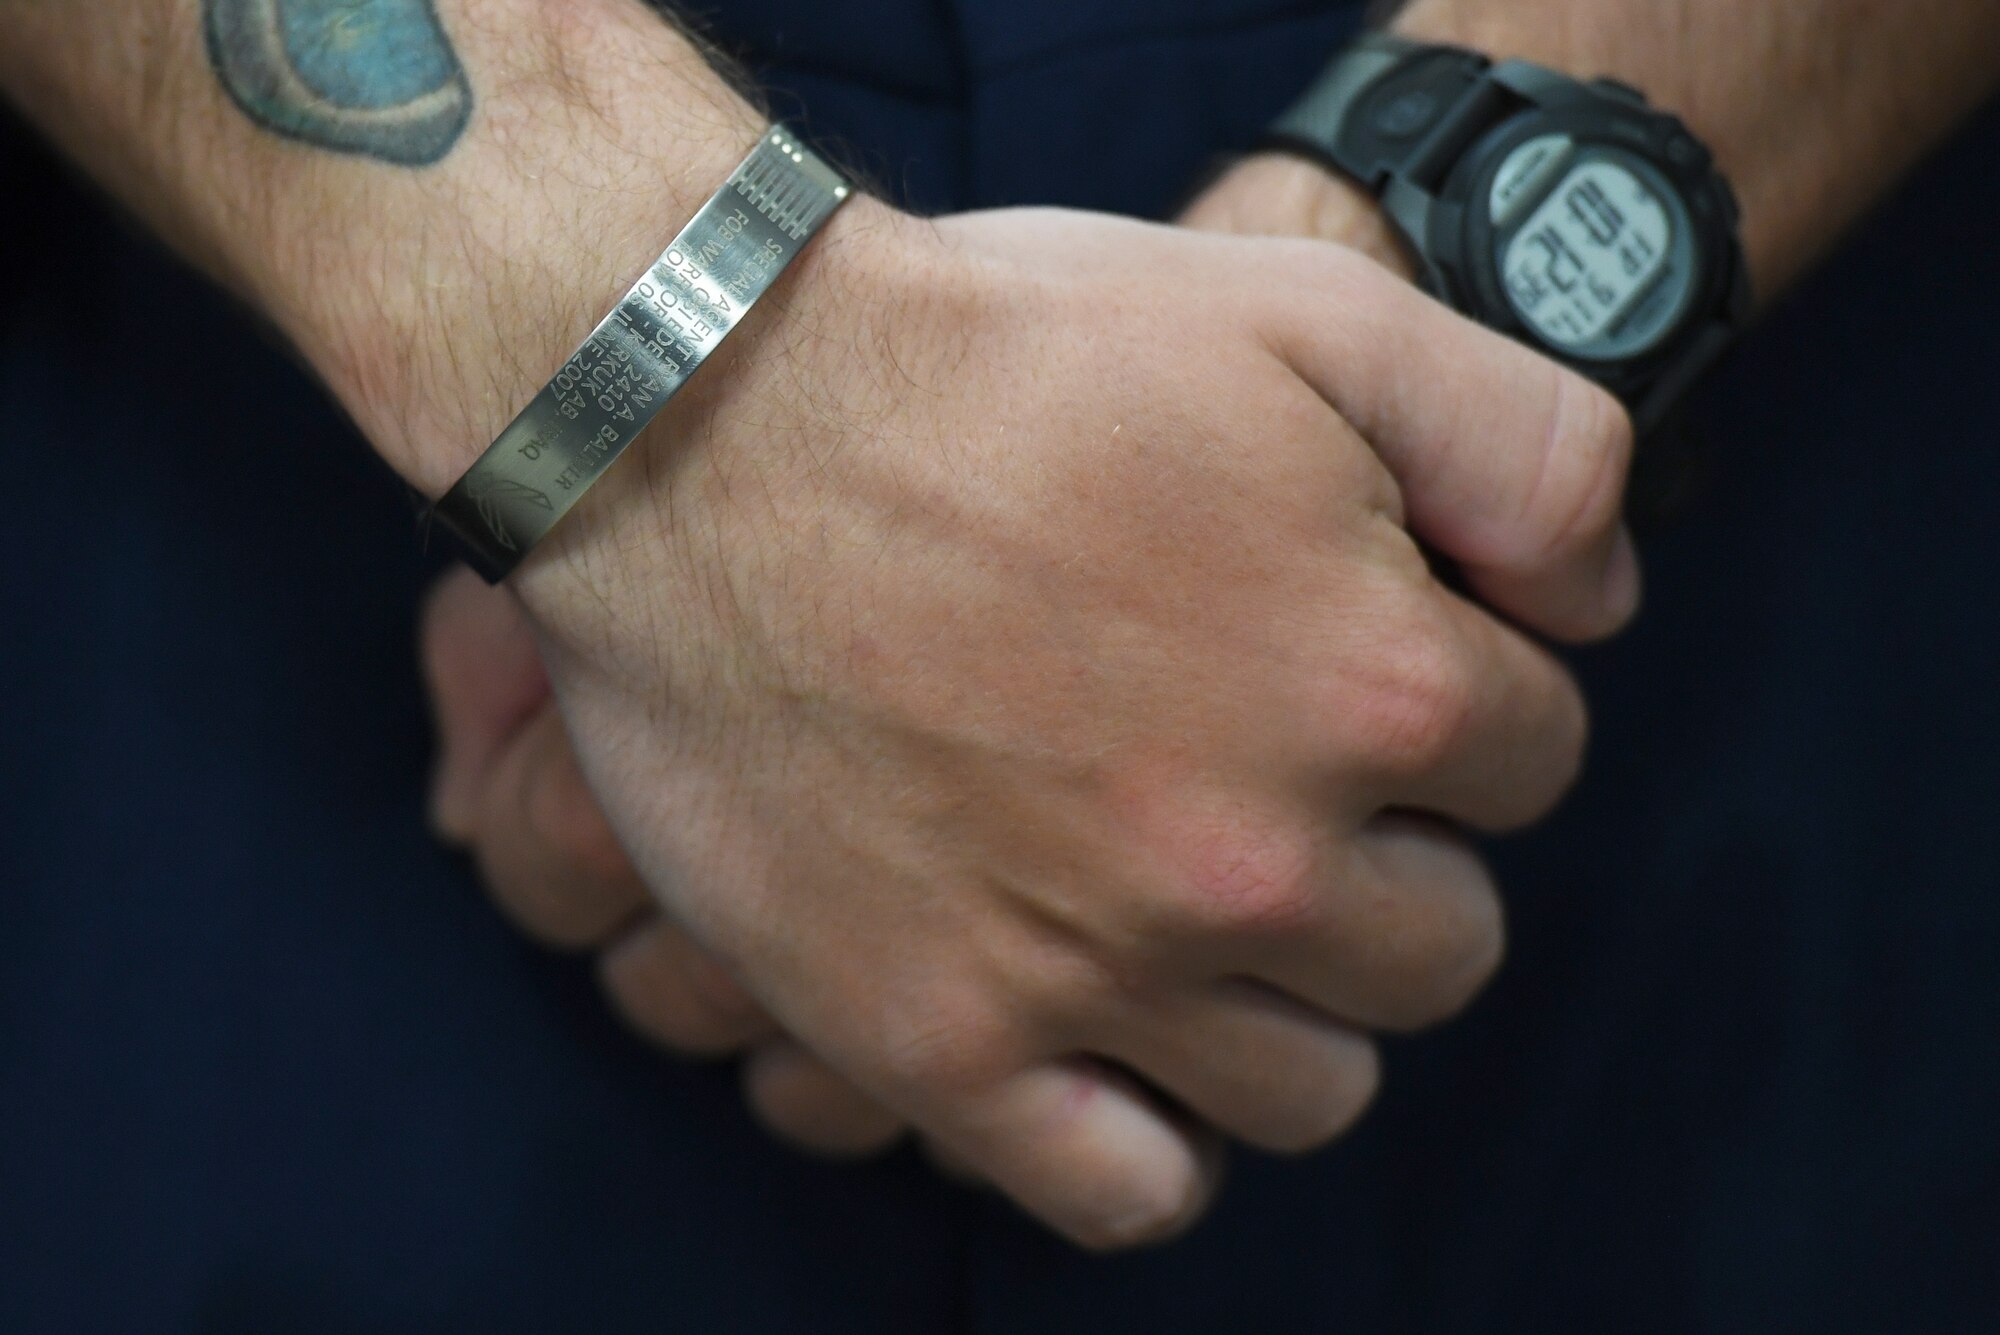 U.S. Air Force Airman Joshua Balmer, 737th Training Group basic military training graduate, wears a memorial bracelet during a presentation ceremony inside the Levitow Training Support Facility at Keesler Air Force Base, Mississippi, Sept. 11, 2020. Balmer, son of fallen Air Force Office of Special Investigations Special Agent Ryan Balmer, was presented mementos by the AFOSI Detachment 407 following his graduation from BMT. (U.S. Air Force photo by Kemberly Groue)